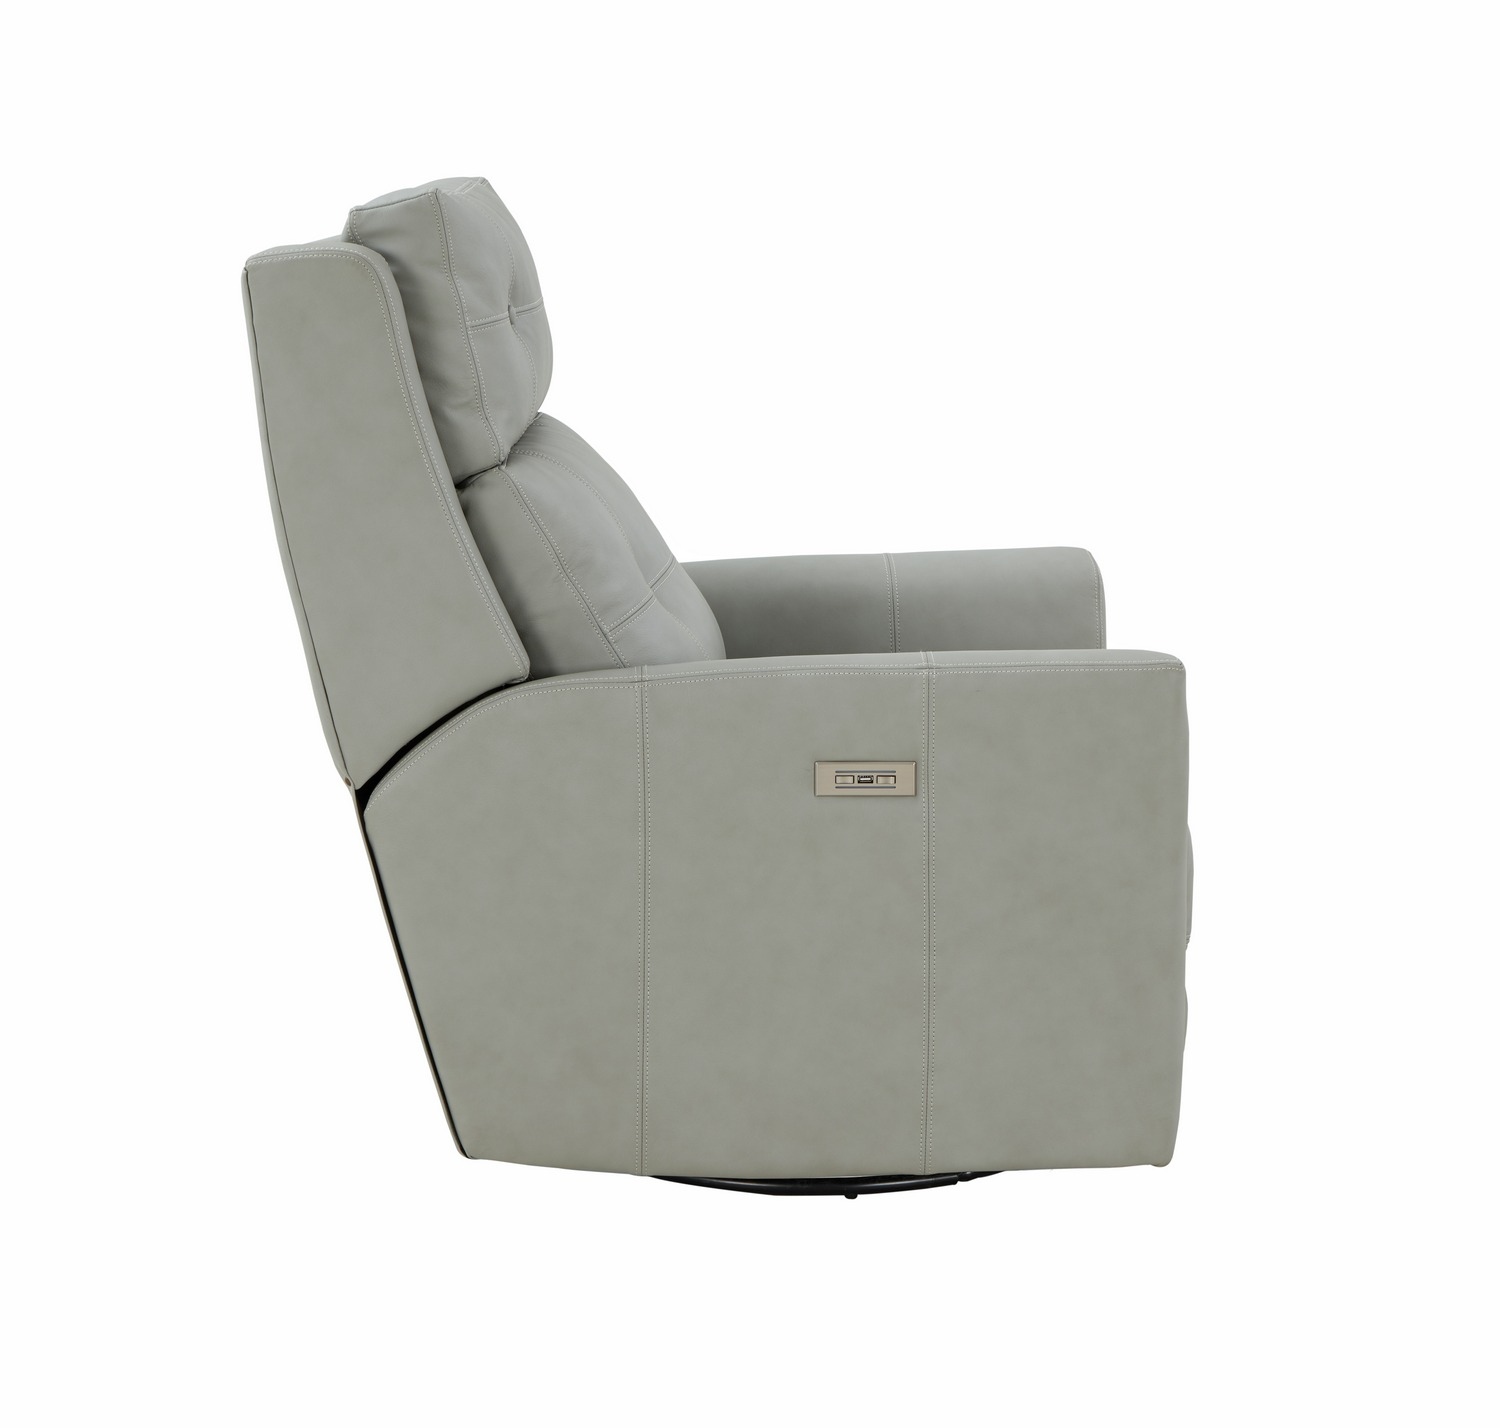 Barcalounger Marconi Power Swivel Glider Recliner Chair with Power Head Rest - Corbett Chromium/All Leather